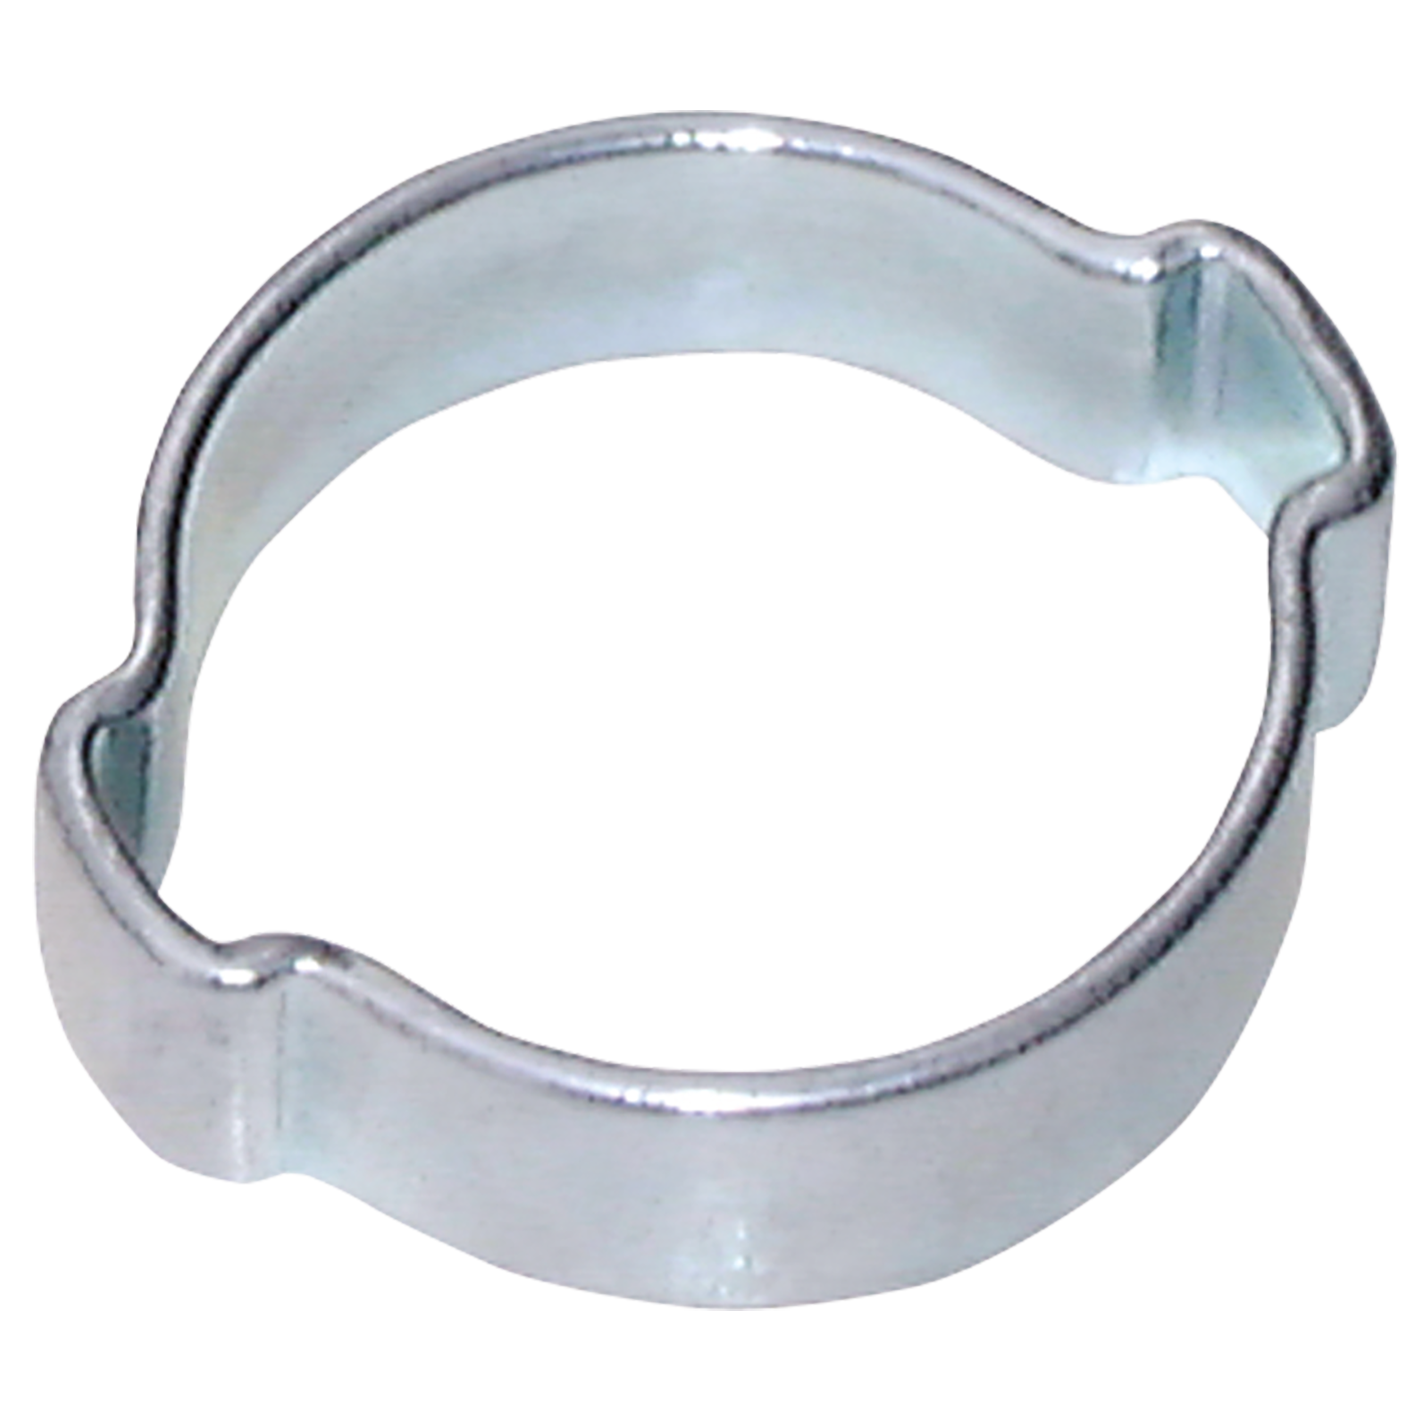 16.0- 9.0MM 2-EAR STEEL CLAMP PLATED